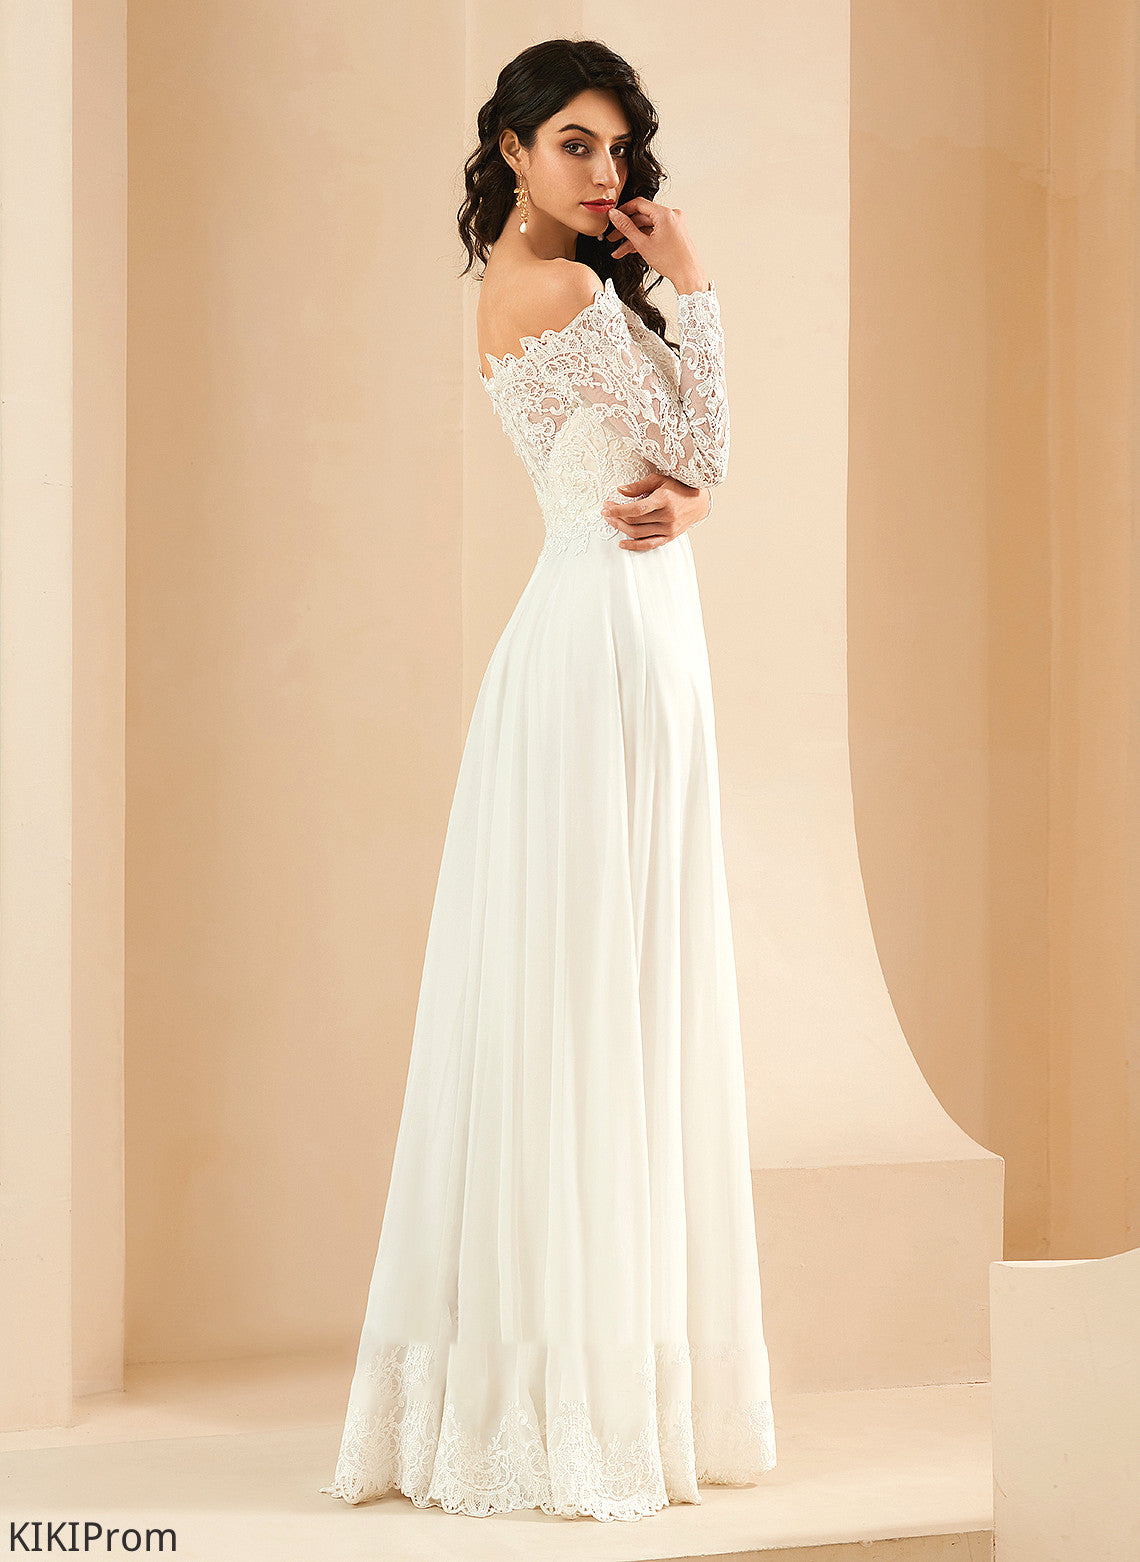 Lace Off-the-Shoulder Sweep Dress Wedding With Wedding Dresses A-Line Serenity Train